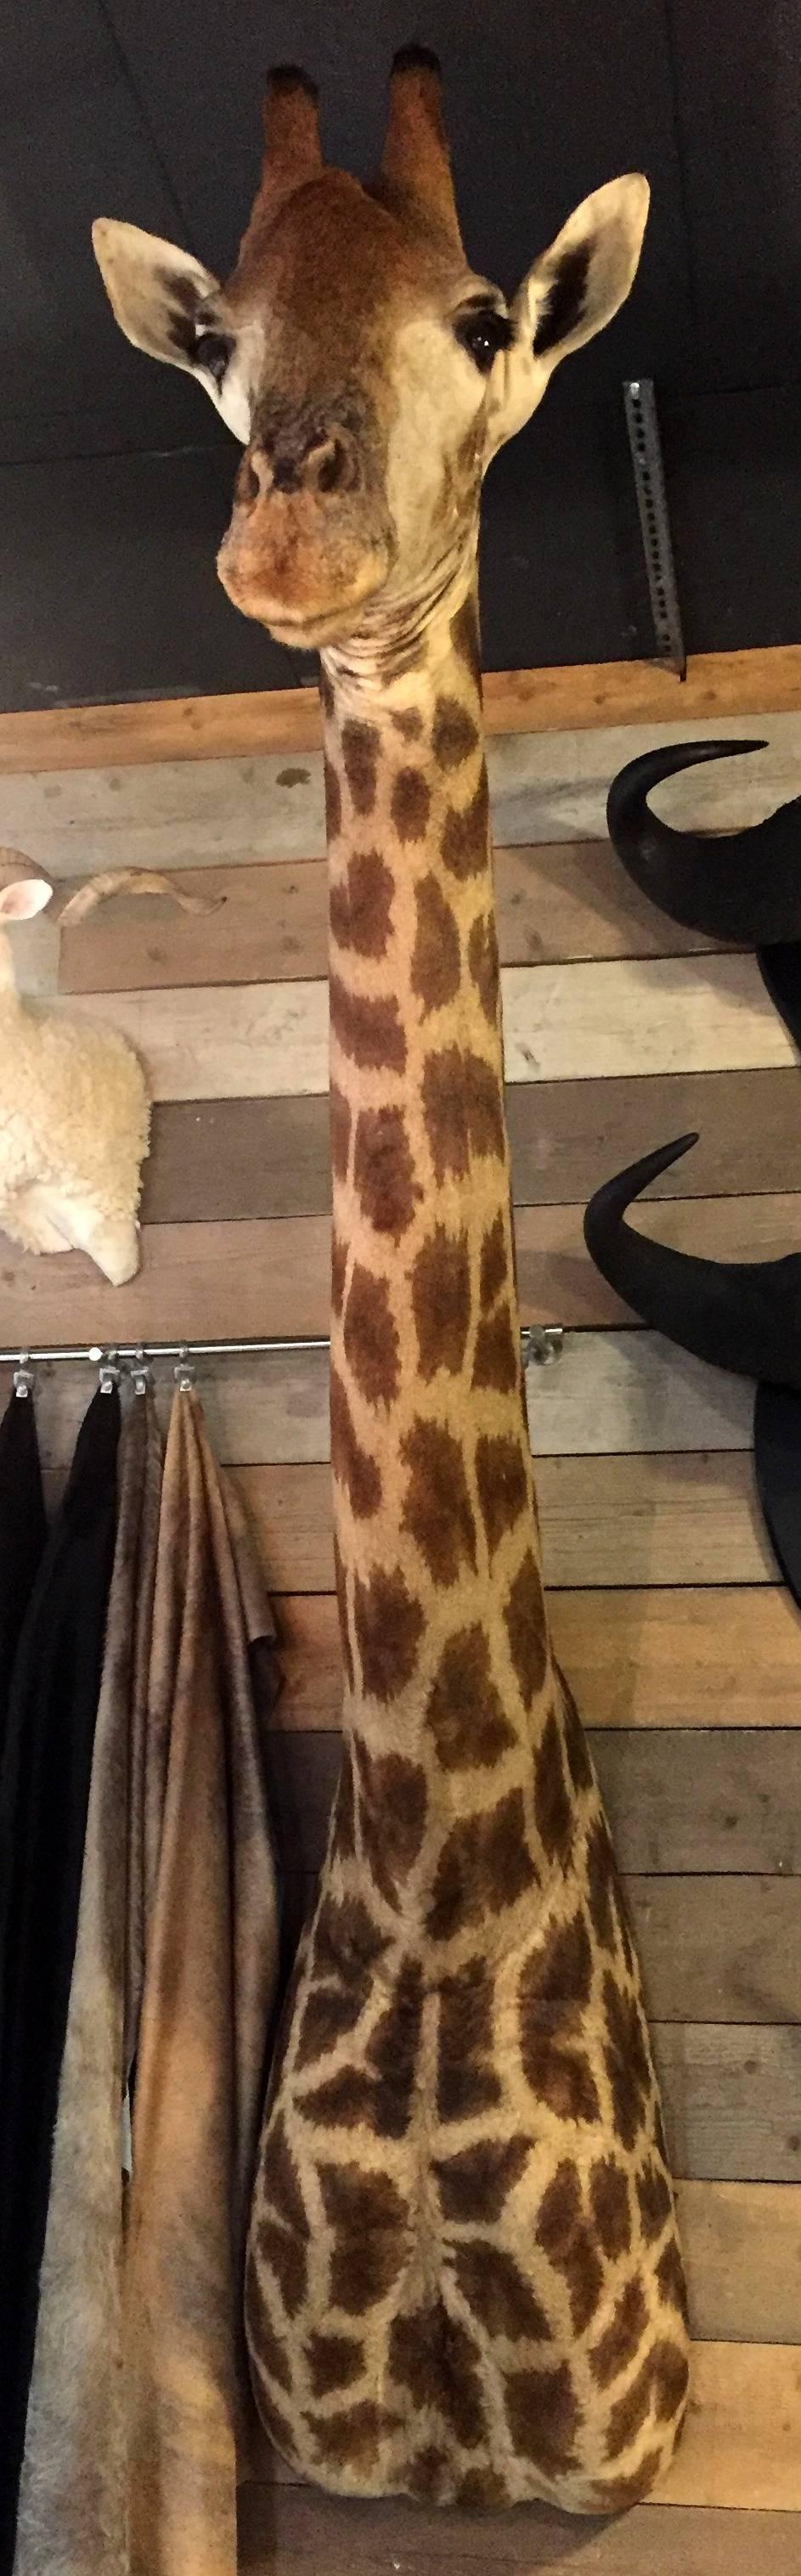 This recently stuffed head and neck of a Giraffe is of museum quality.
Very decorative shoulder mount piece.
 